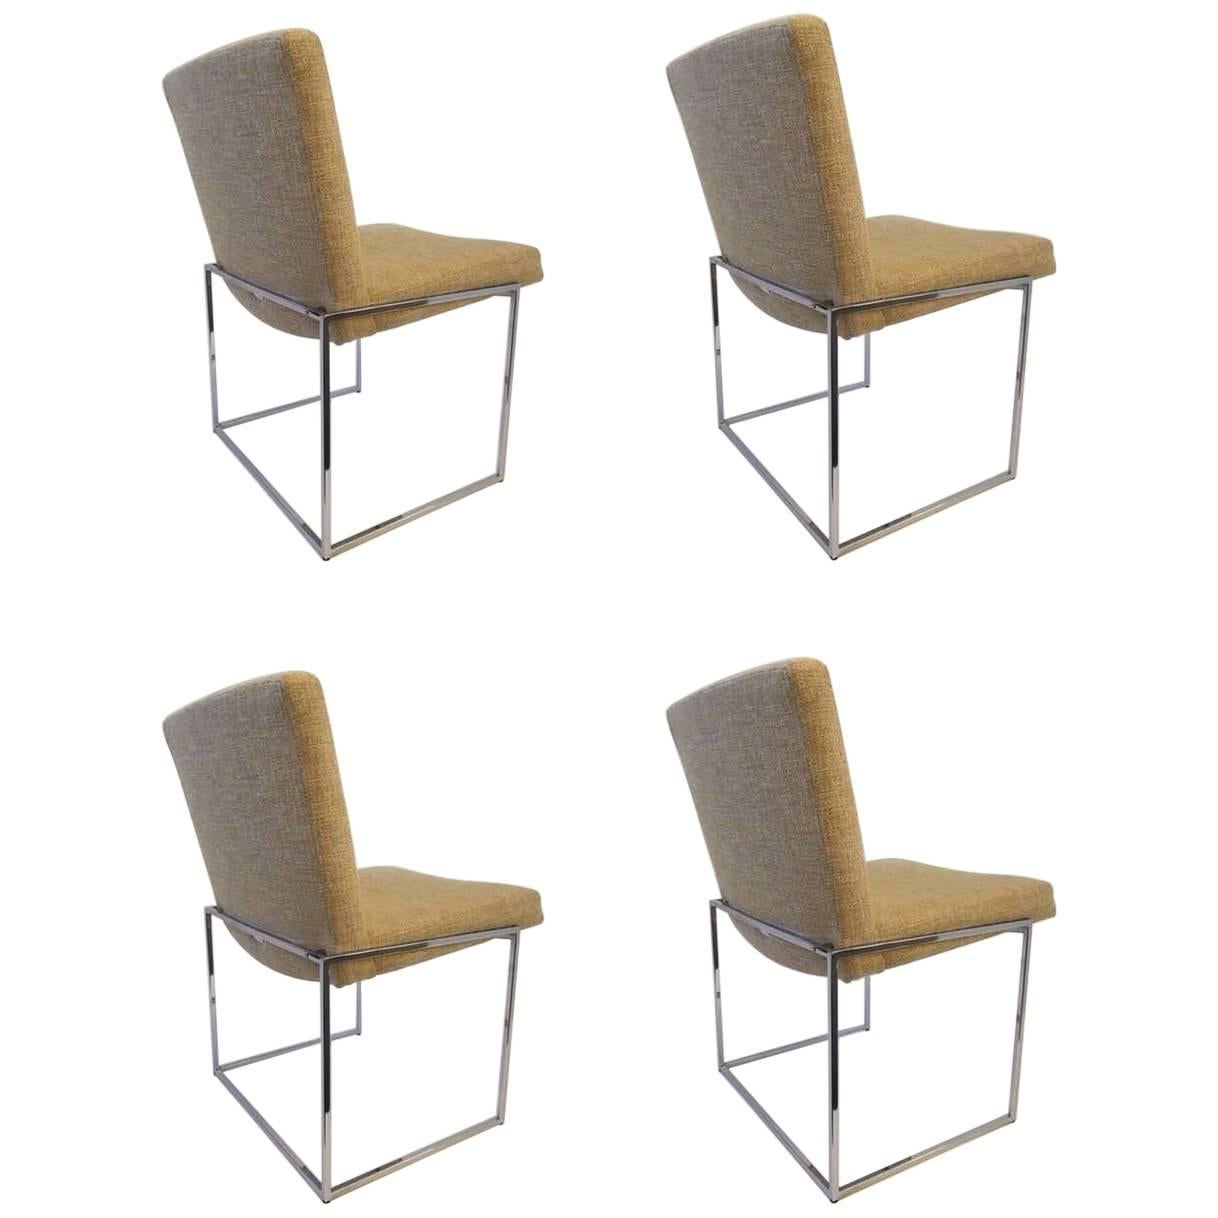 Set of Four Chrome "Thin Line" Dining Chairs by Milo Baughman for Thayer Coggin